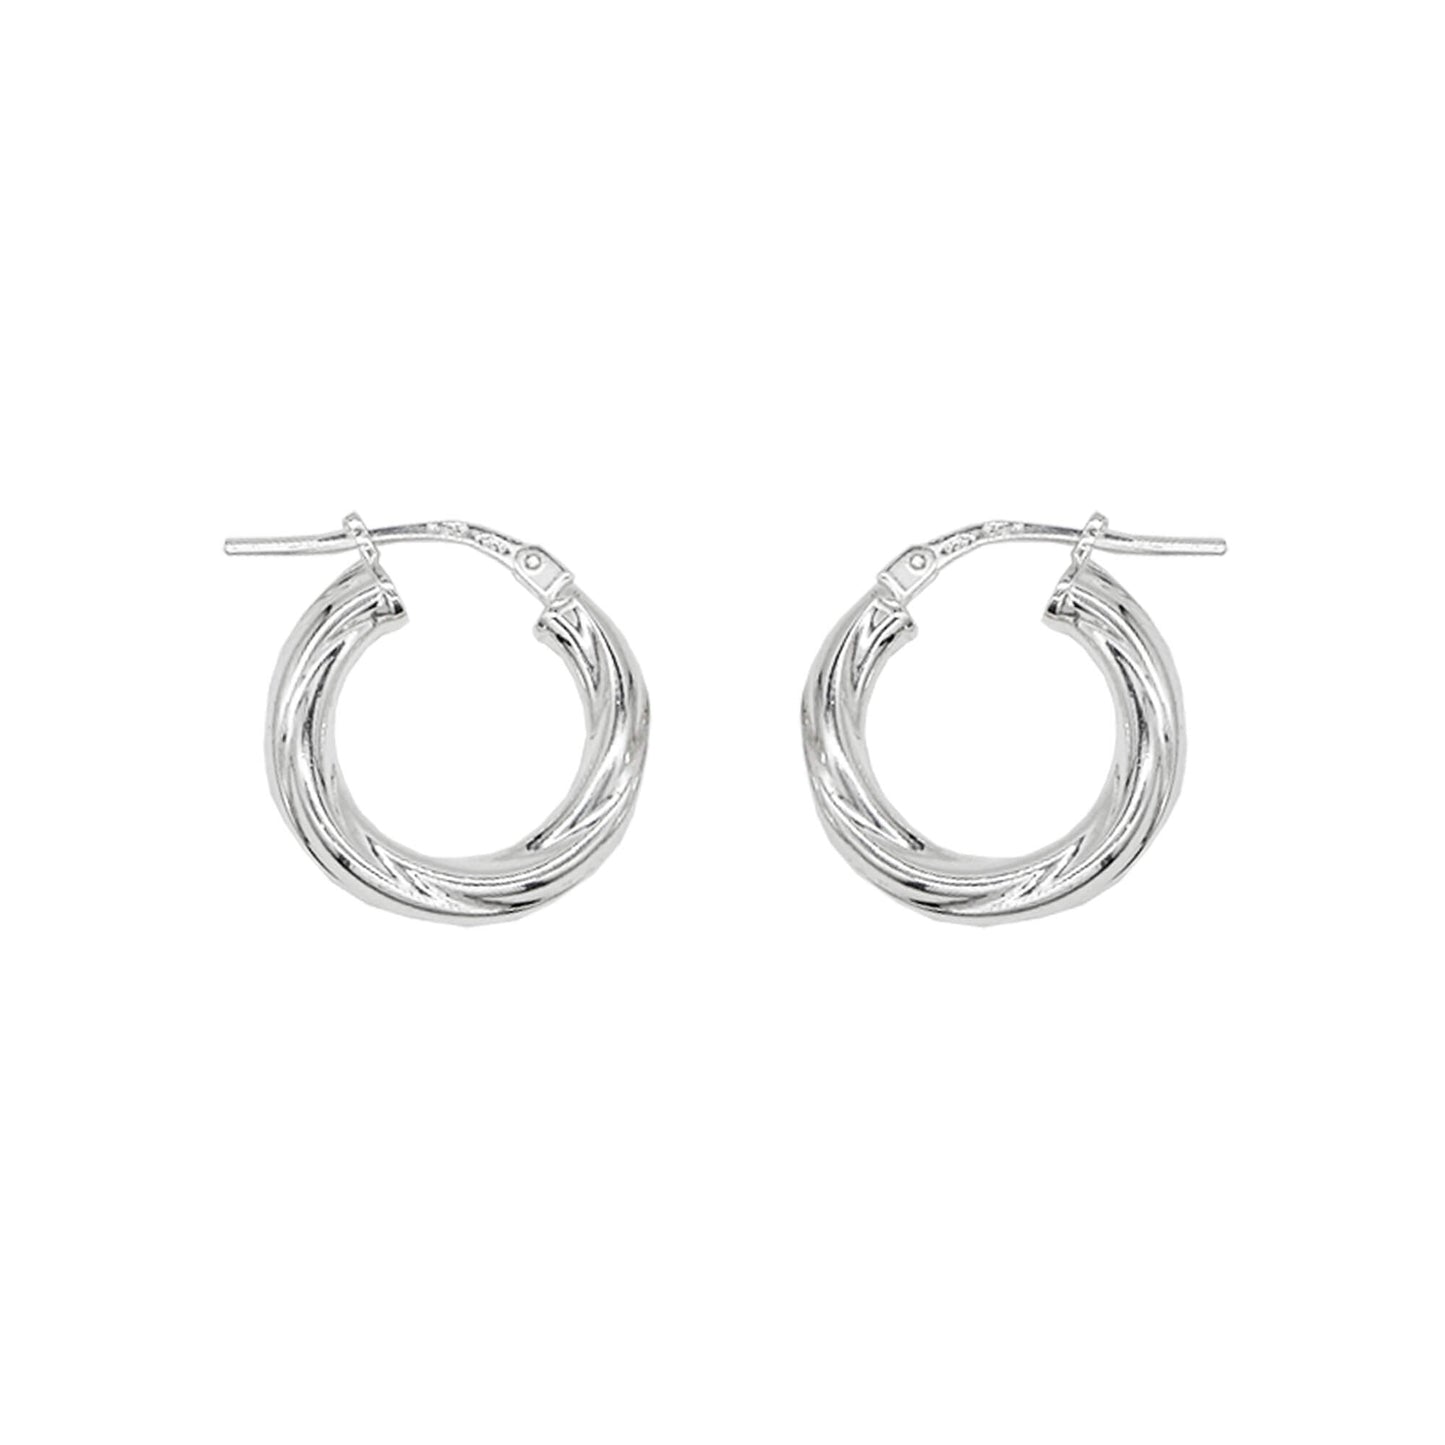 small sterling silver twist hoops with lever closure.